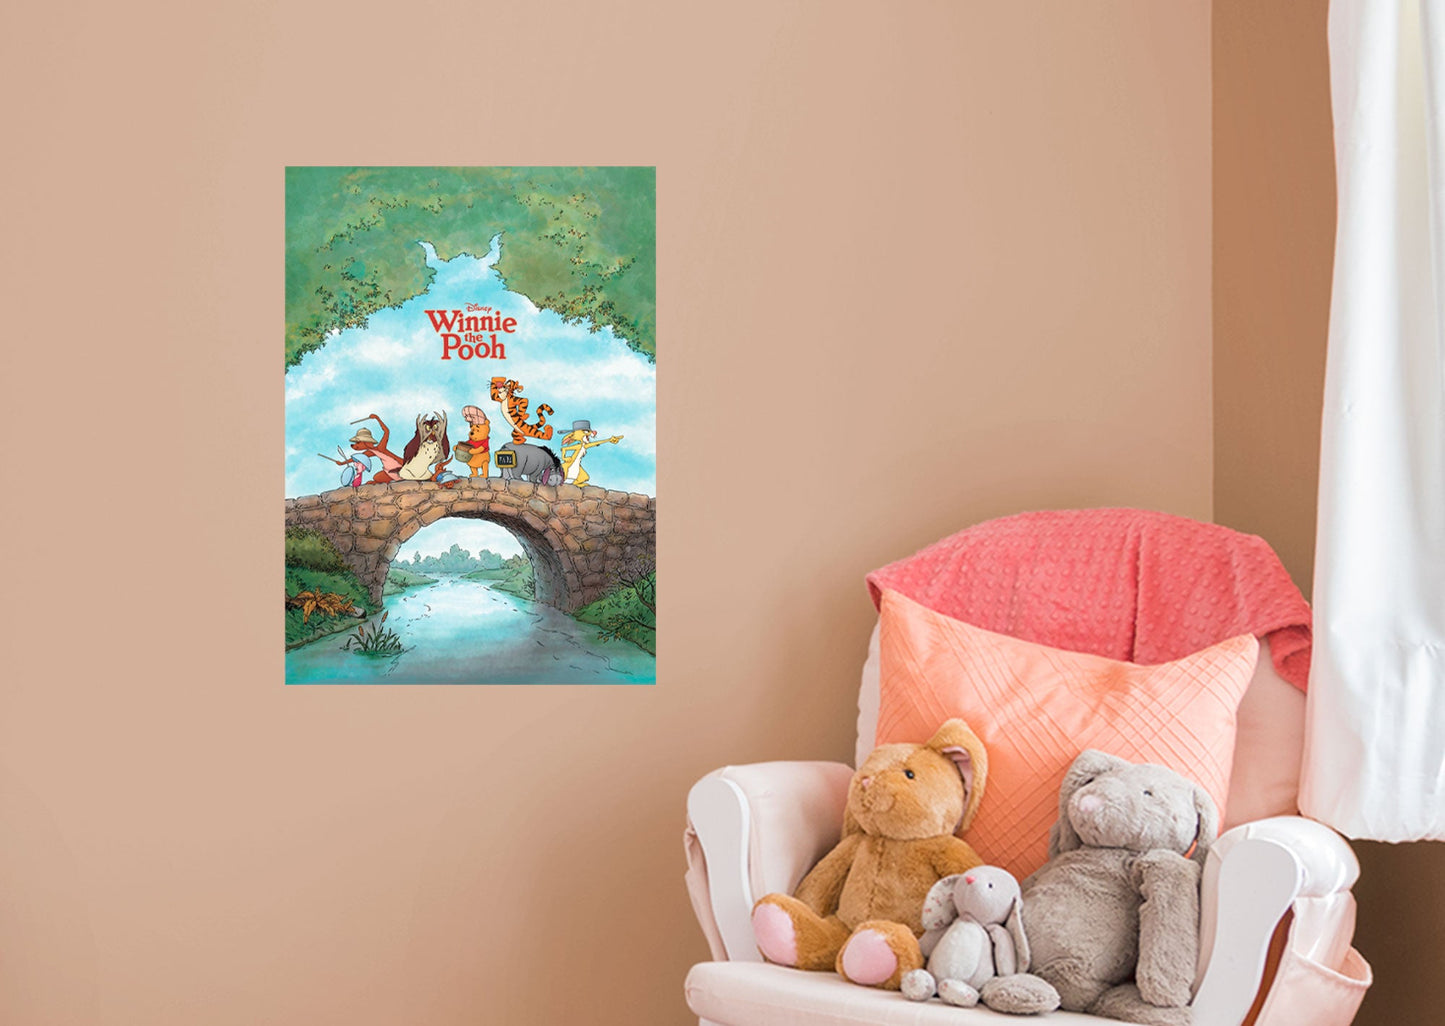 Winnie The Pooh:  Movie Poster Mural        - Officially Licensed Disney Removable Wall   Adhesive Decal